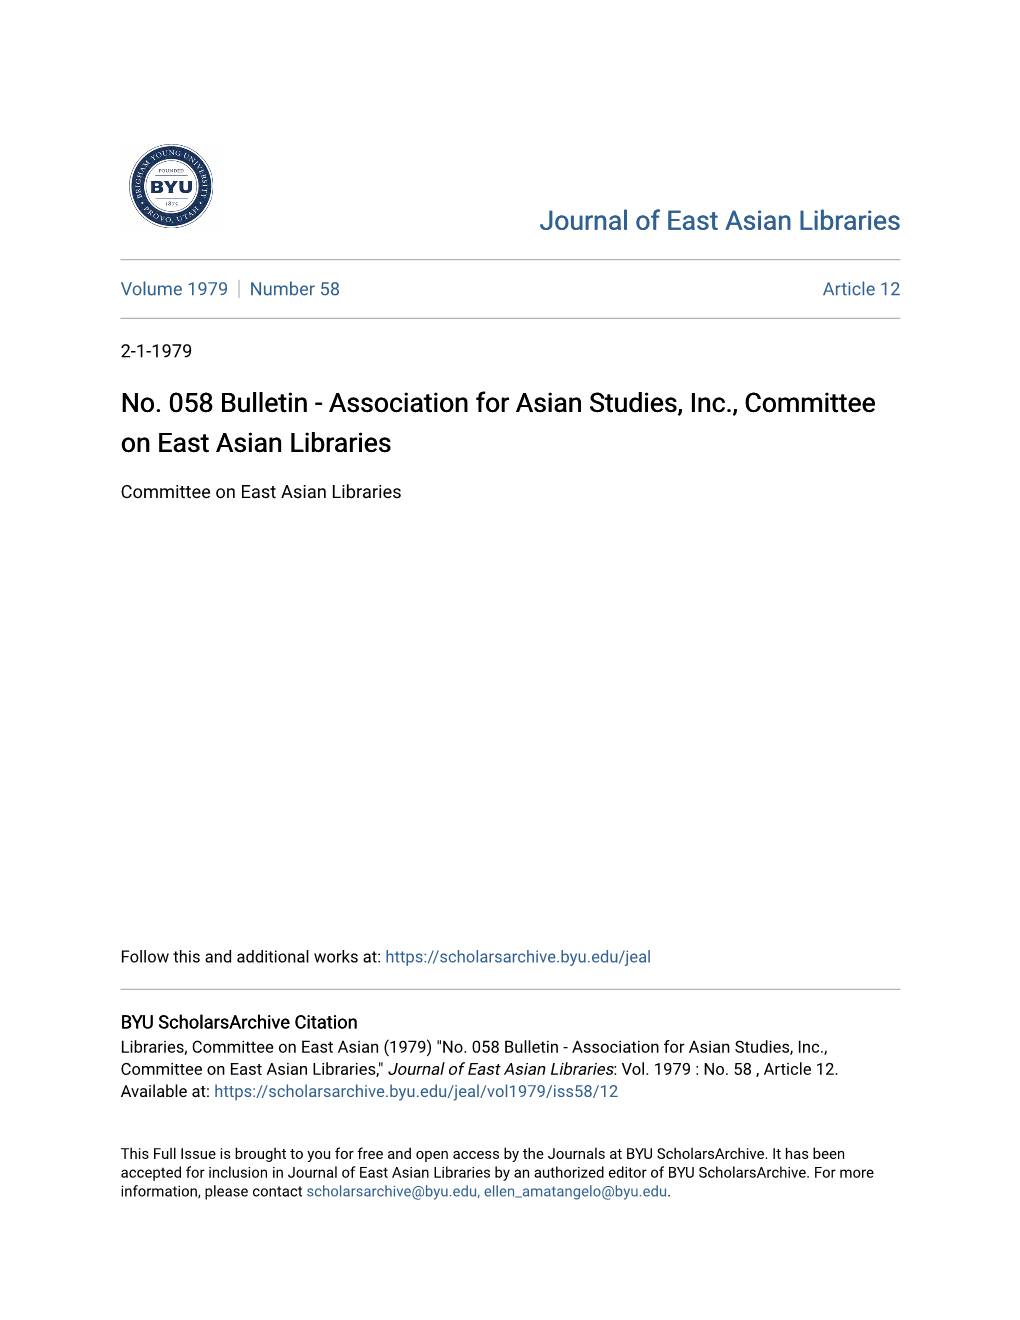 Association for Asian Studies, Inc., Committee on East Asian Libraries